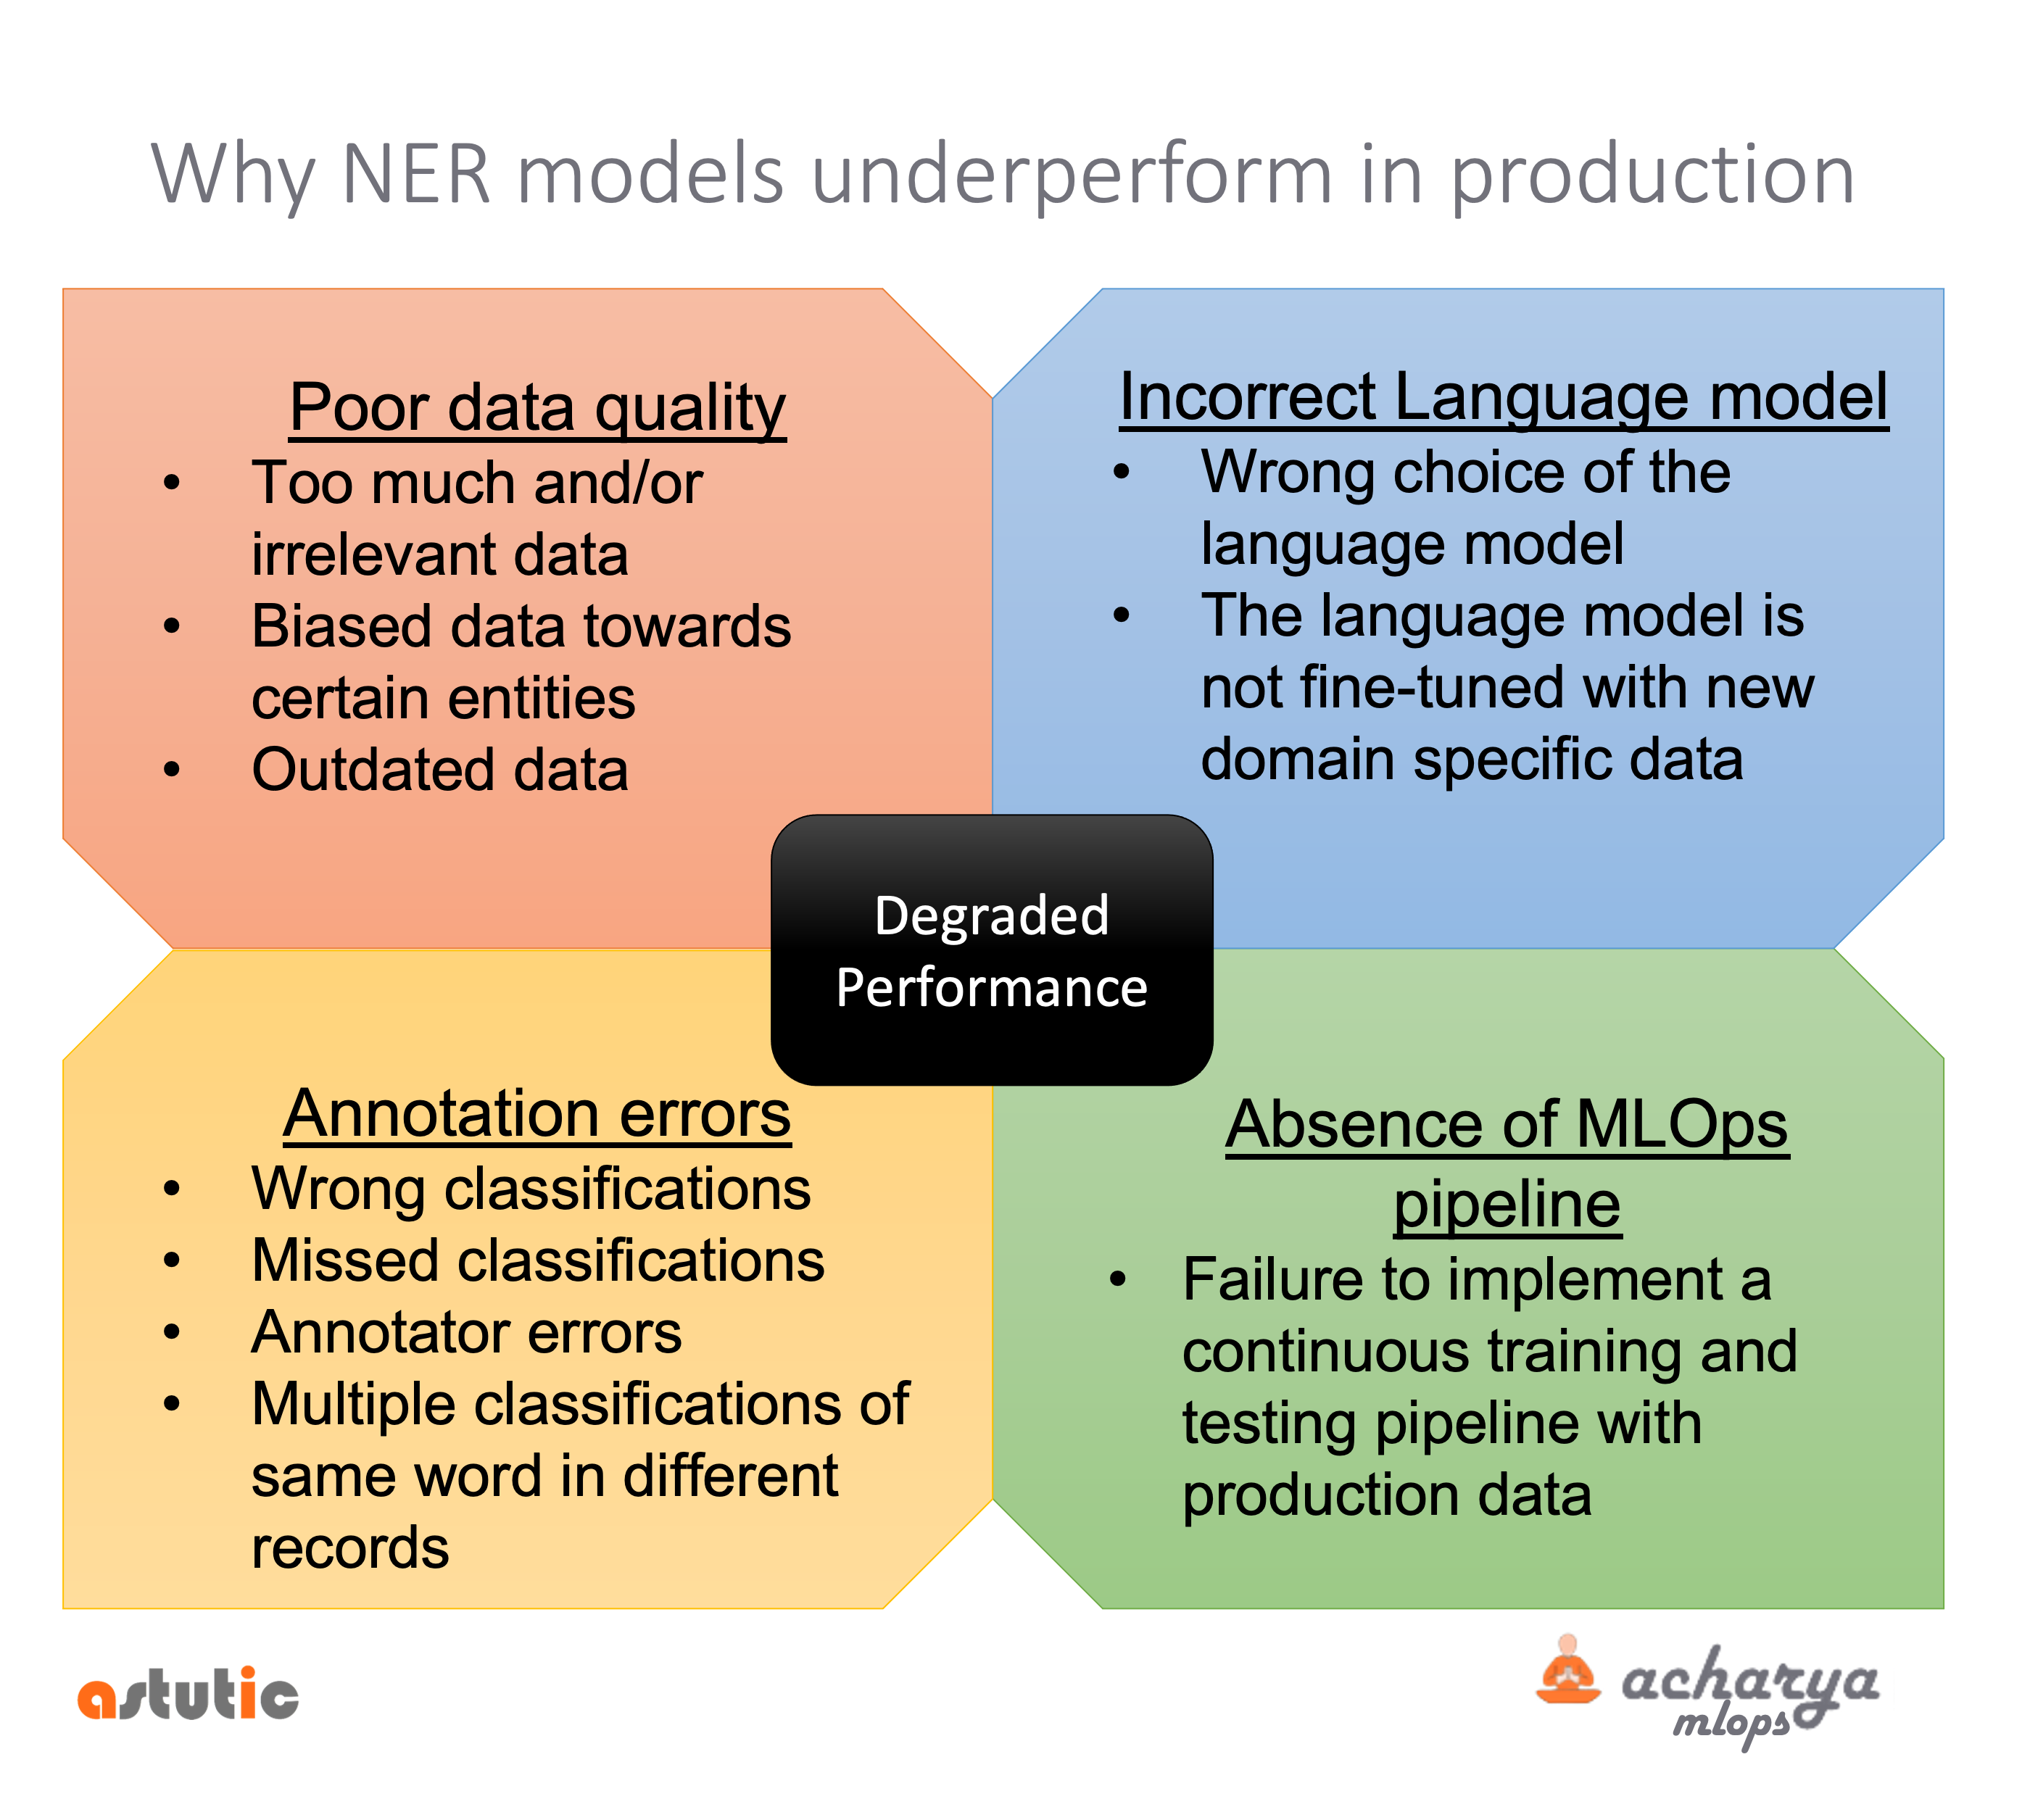 Why NER models underperform in production